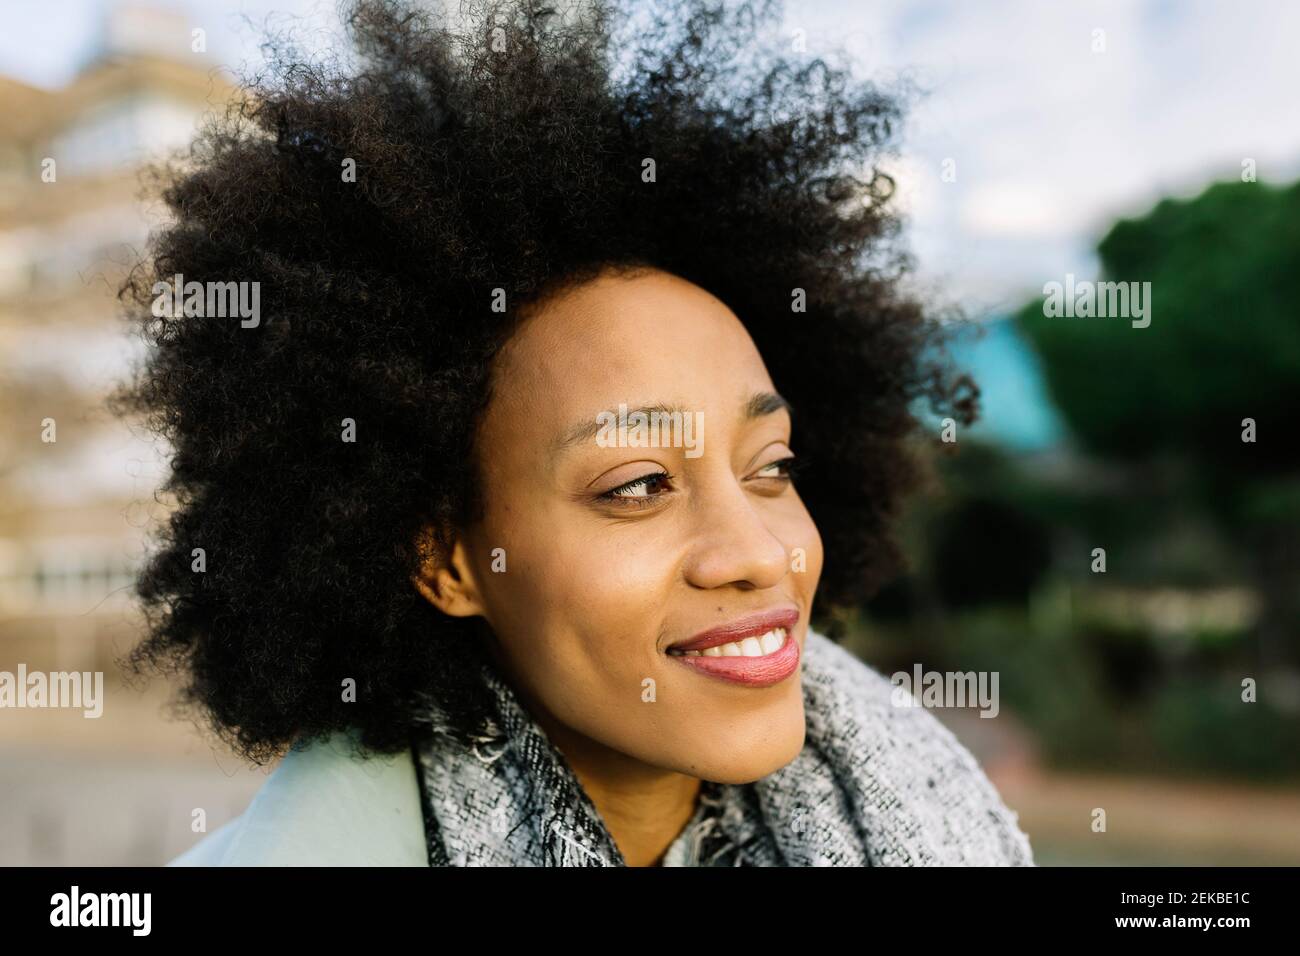 Afro woman smiling while looking away outdoors Stock Photo